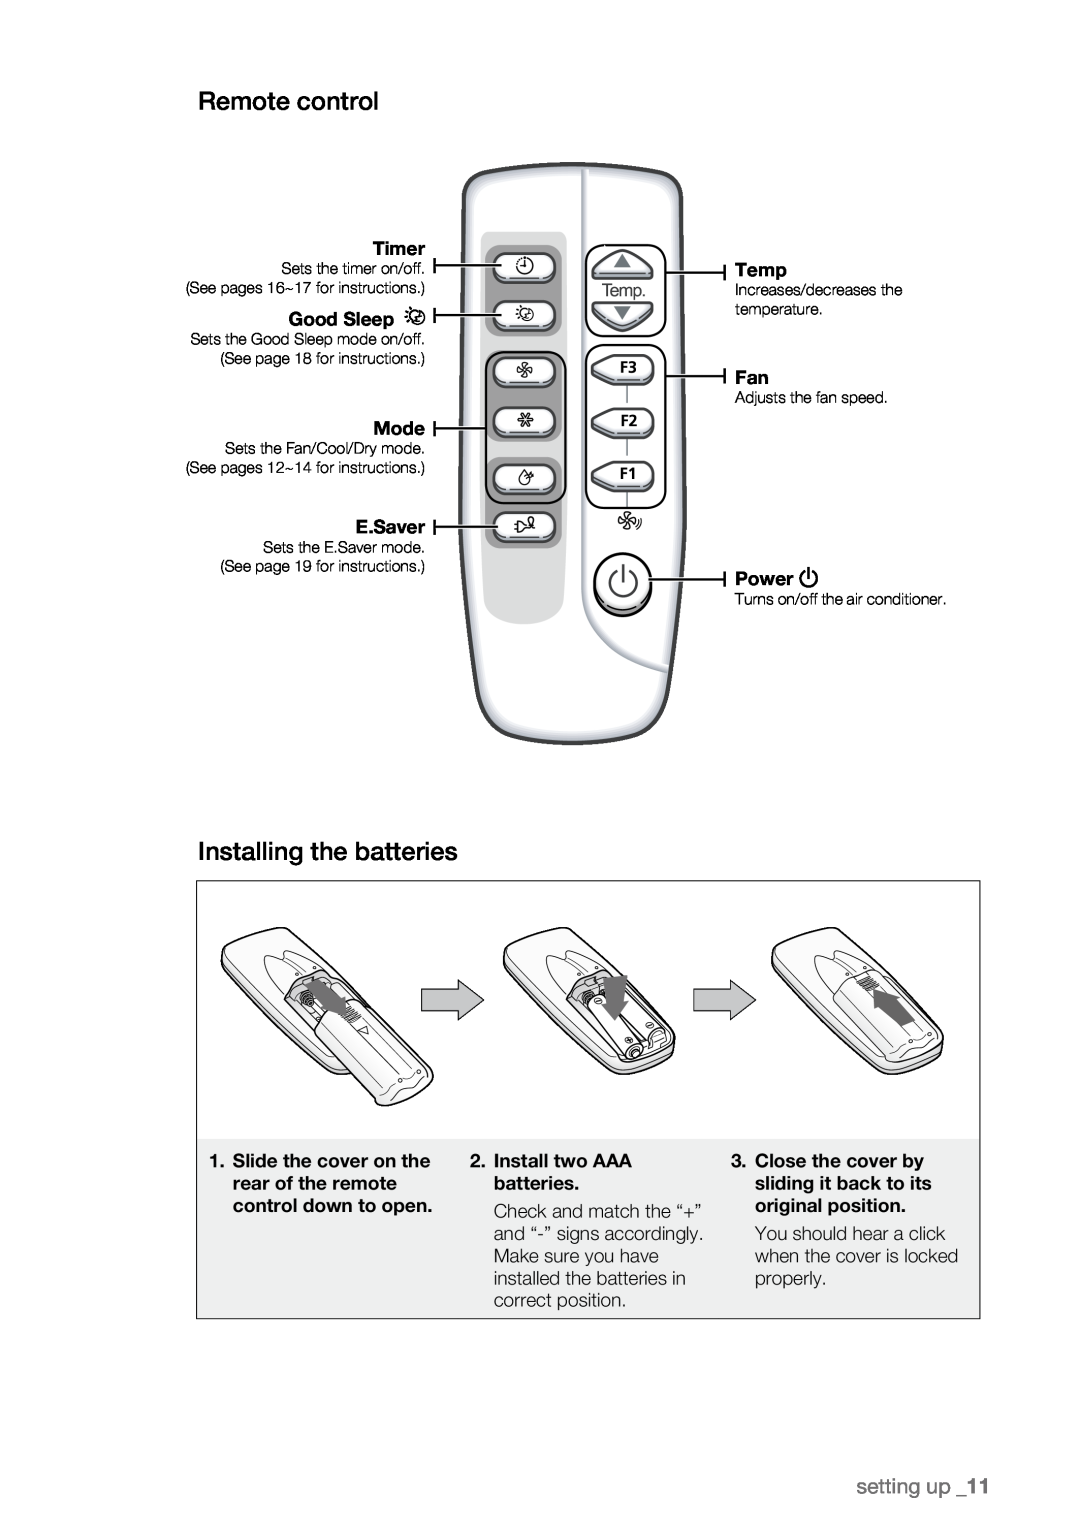 Samsung DB98-29033A, AW06EDB Series user manual Remote control, Installing the batteries, setting up 